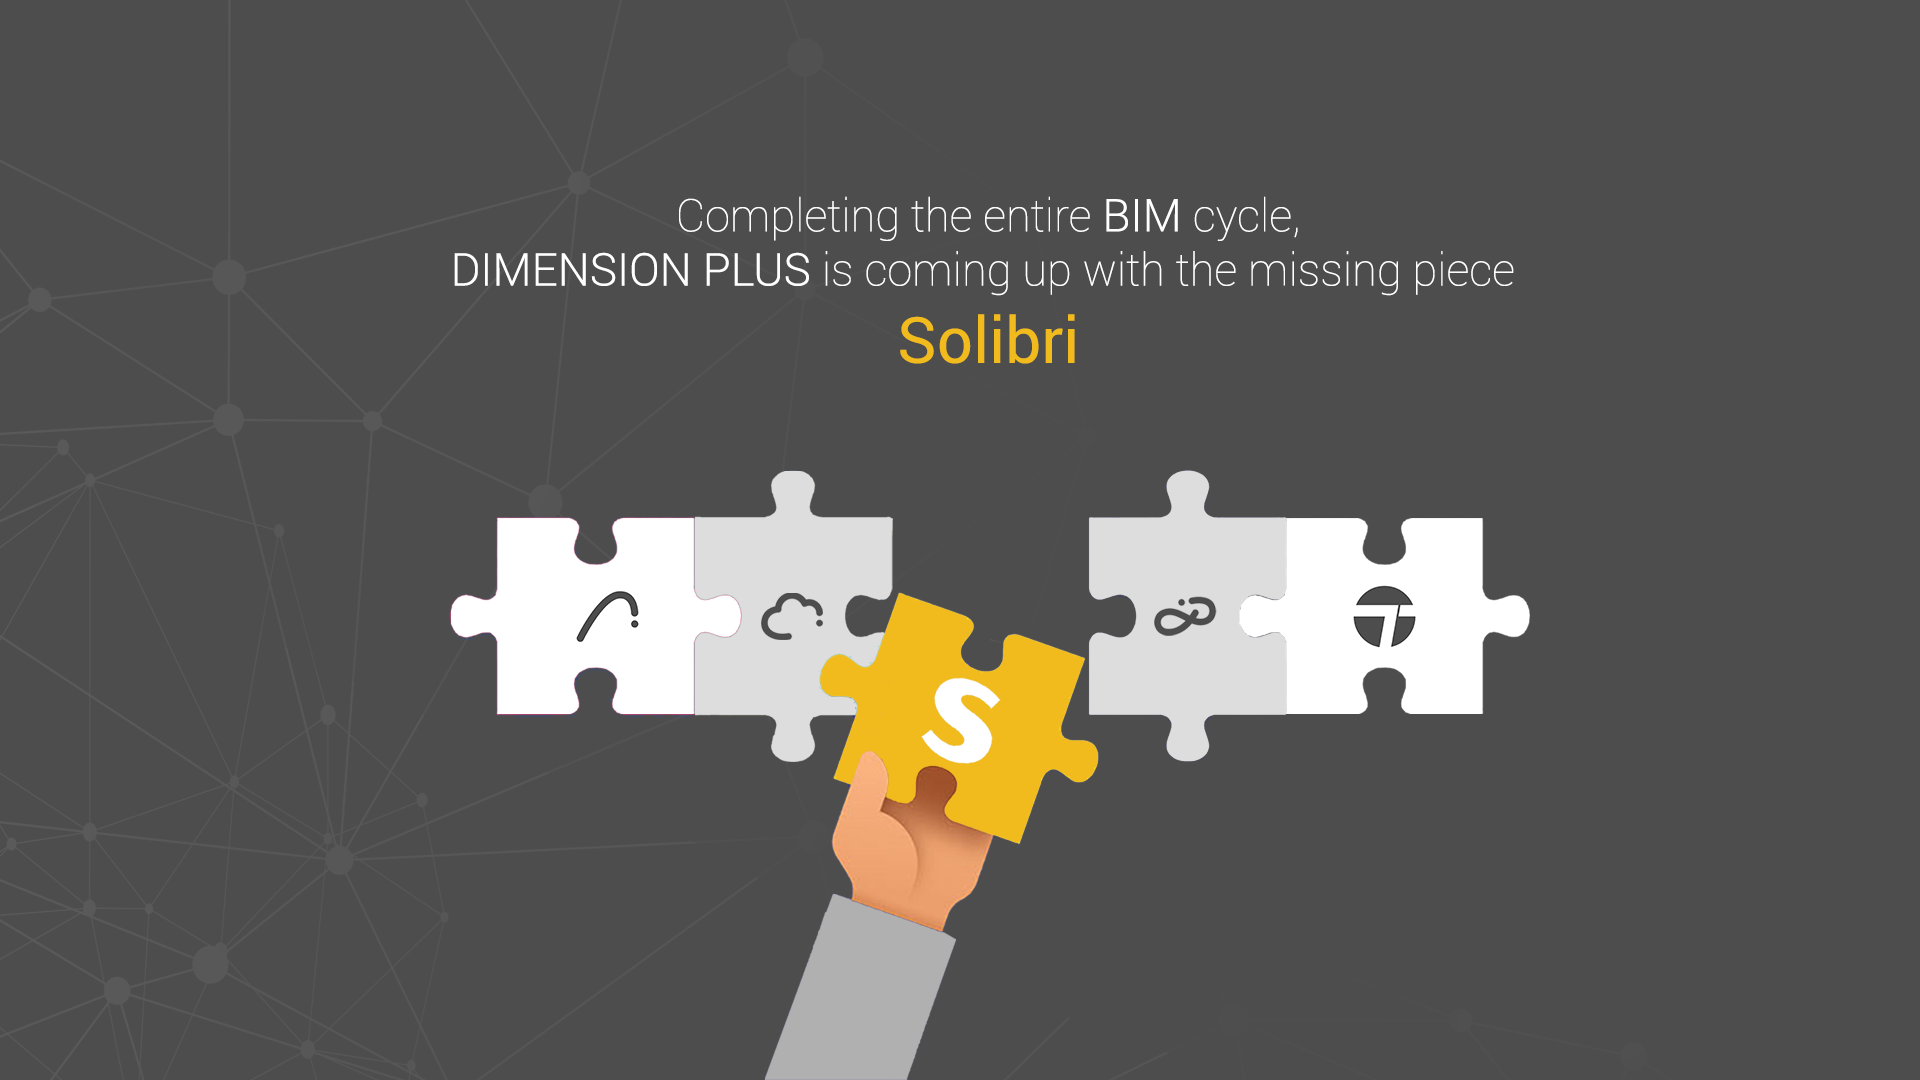 Solibri is now Available with DIMENSION PLUS